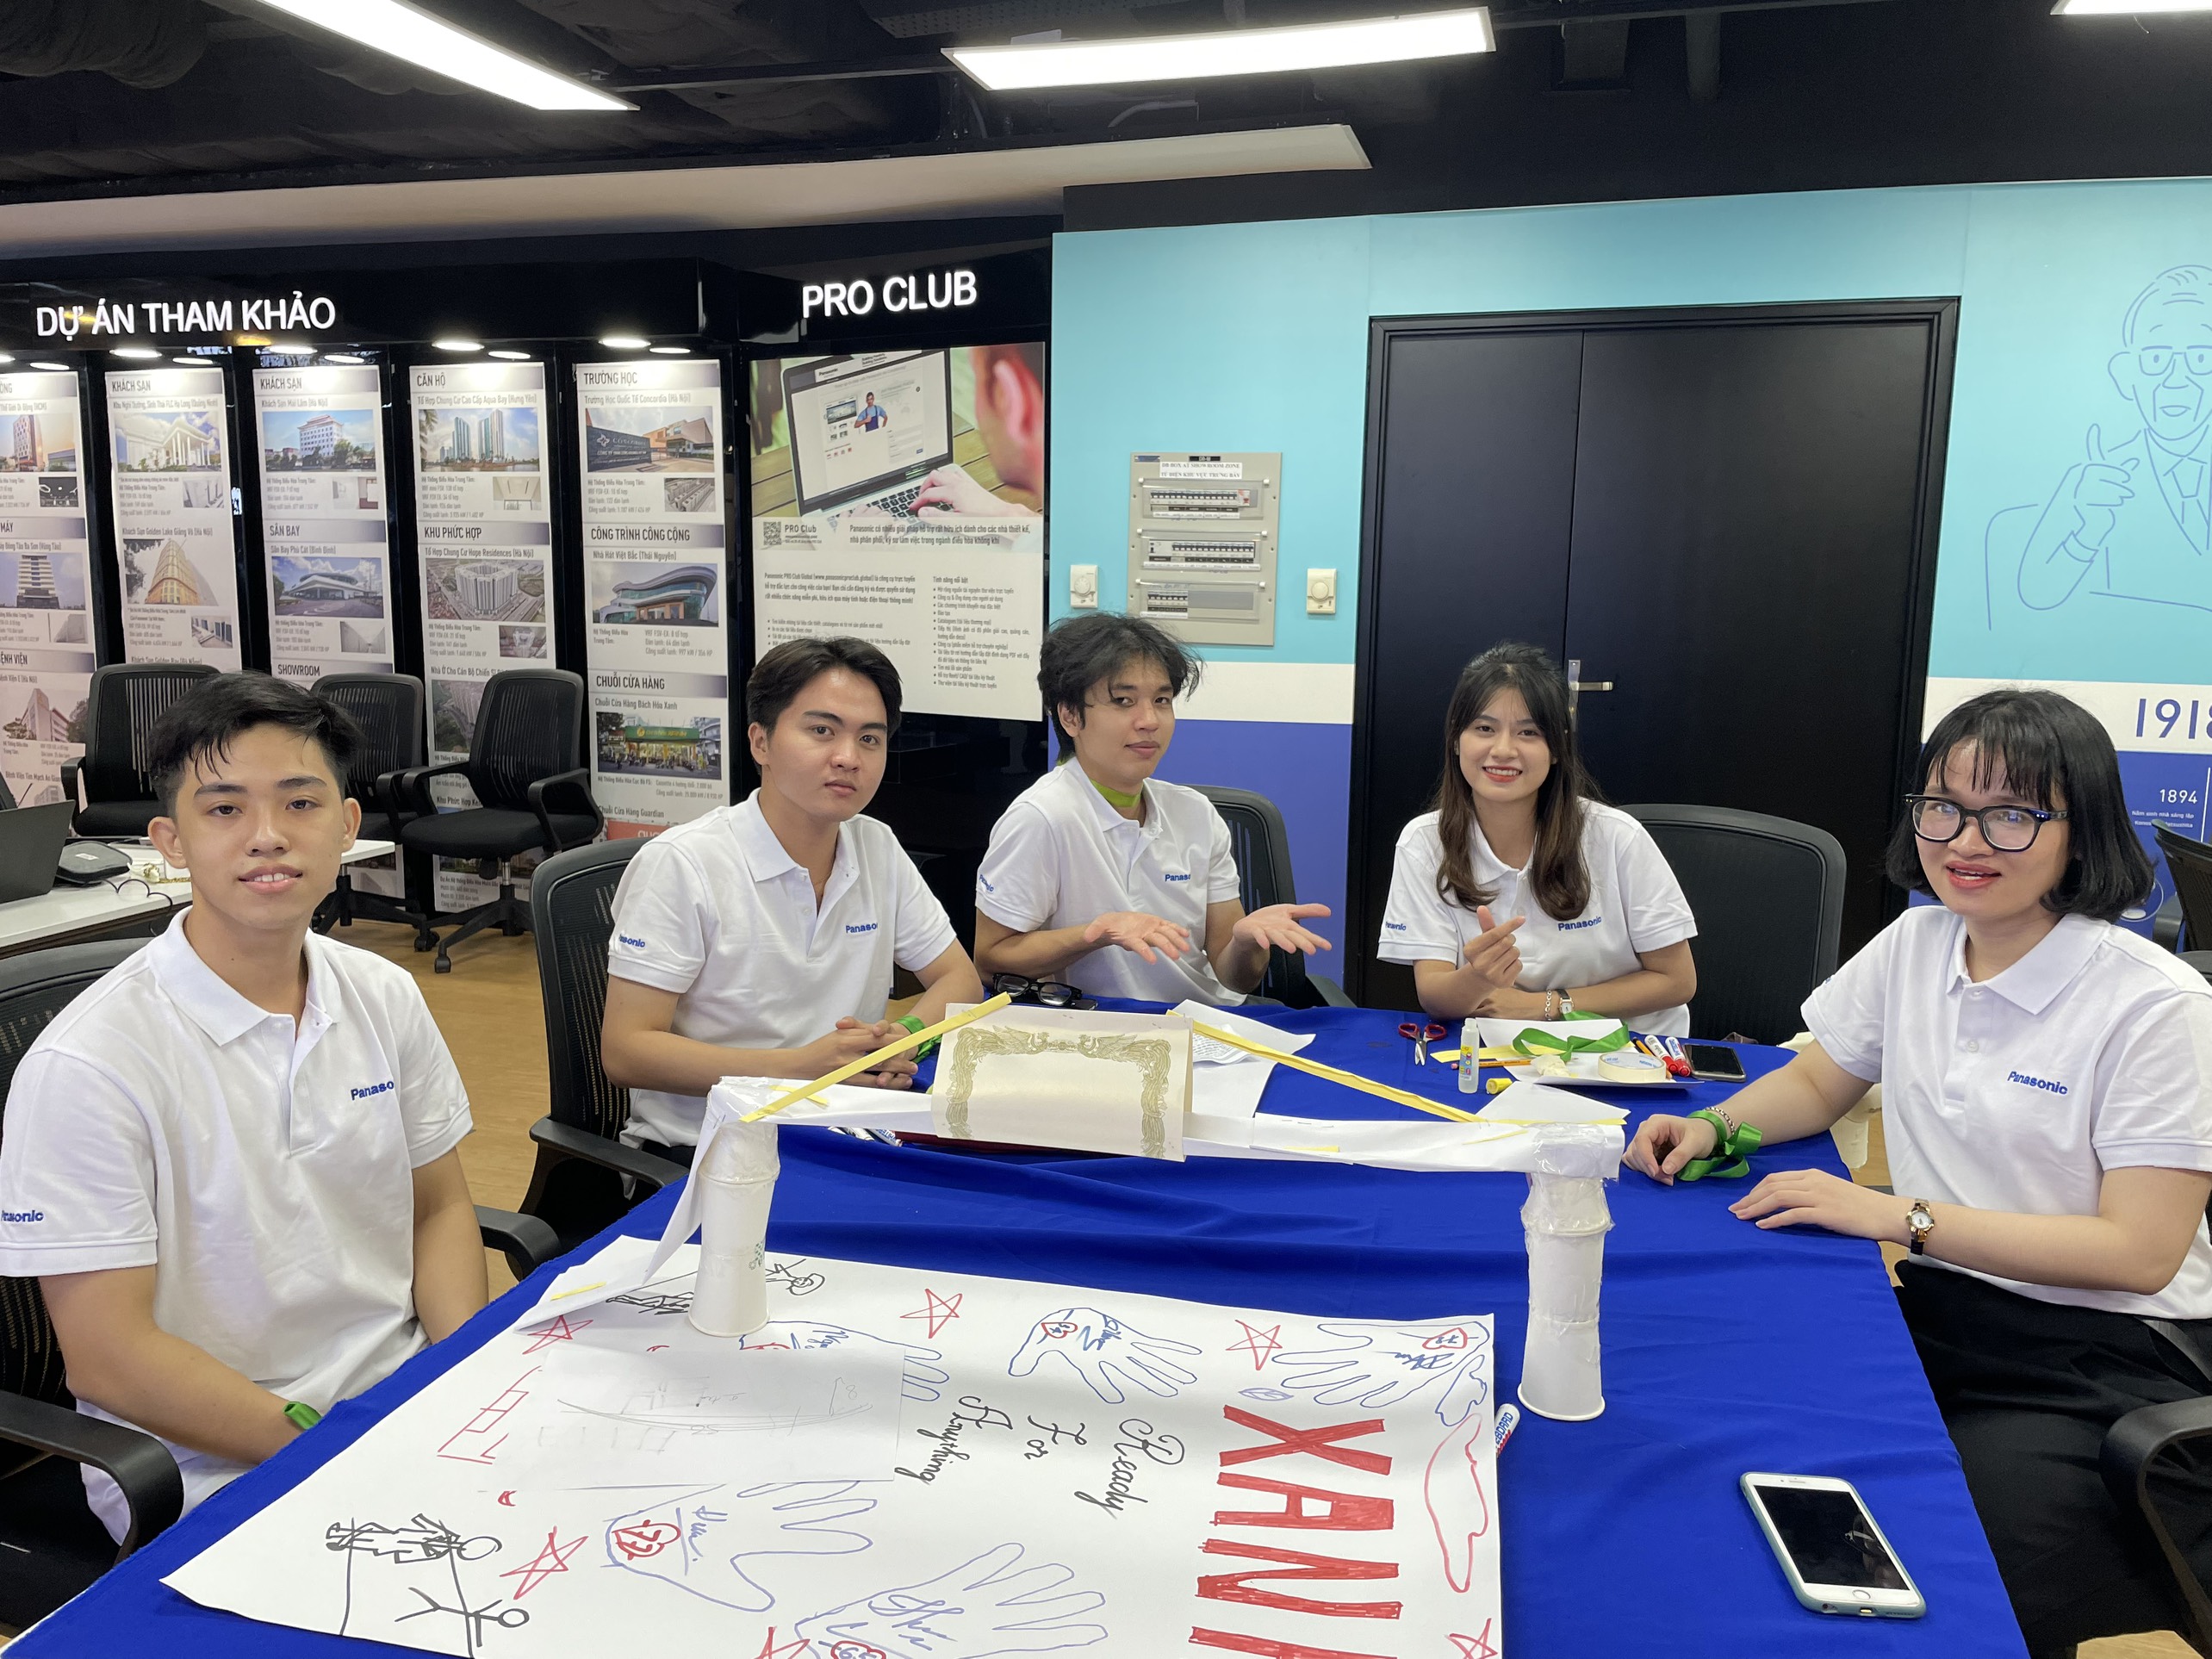 Panasonic enhance the scholarship program, offer more studying opportunities for Vietnamese talented students 